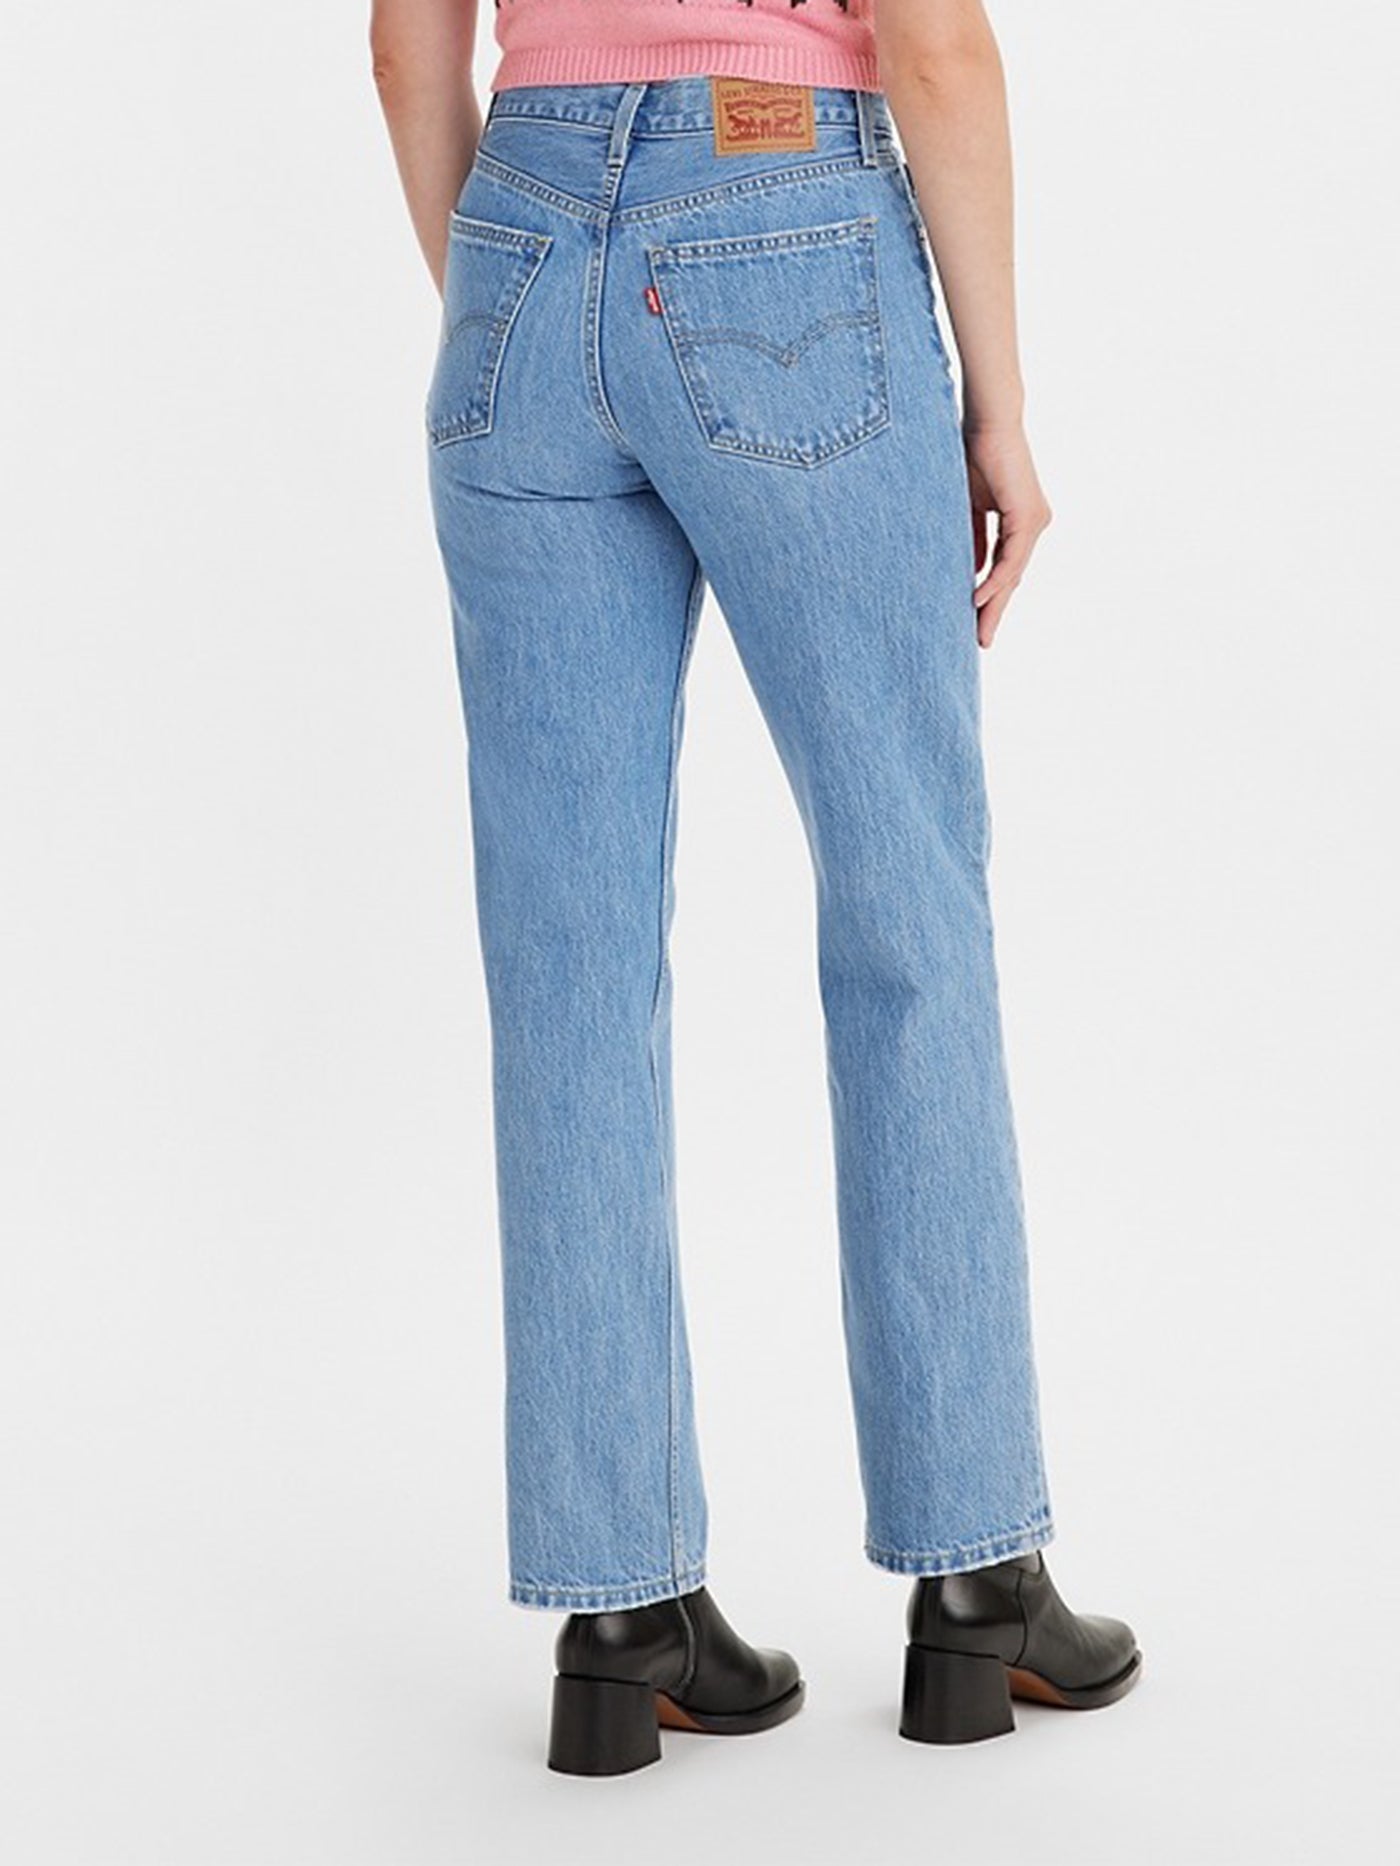 Levi's Low Pro Charlie Try Jeans